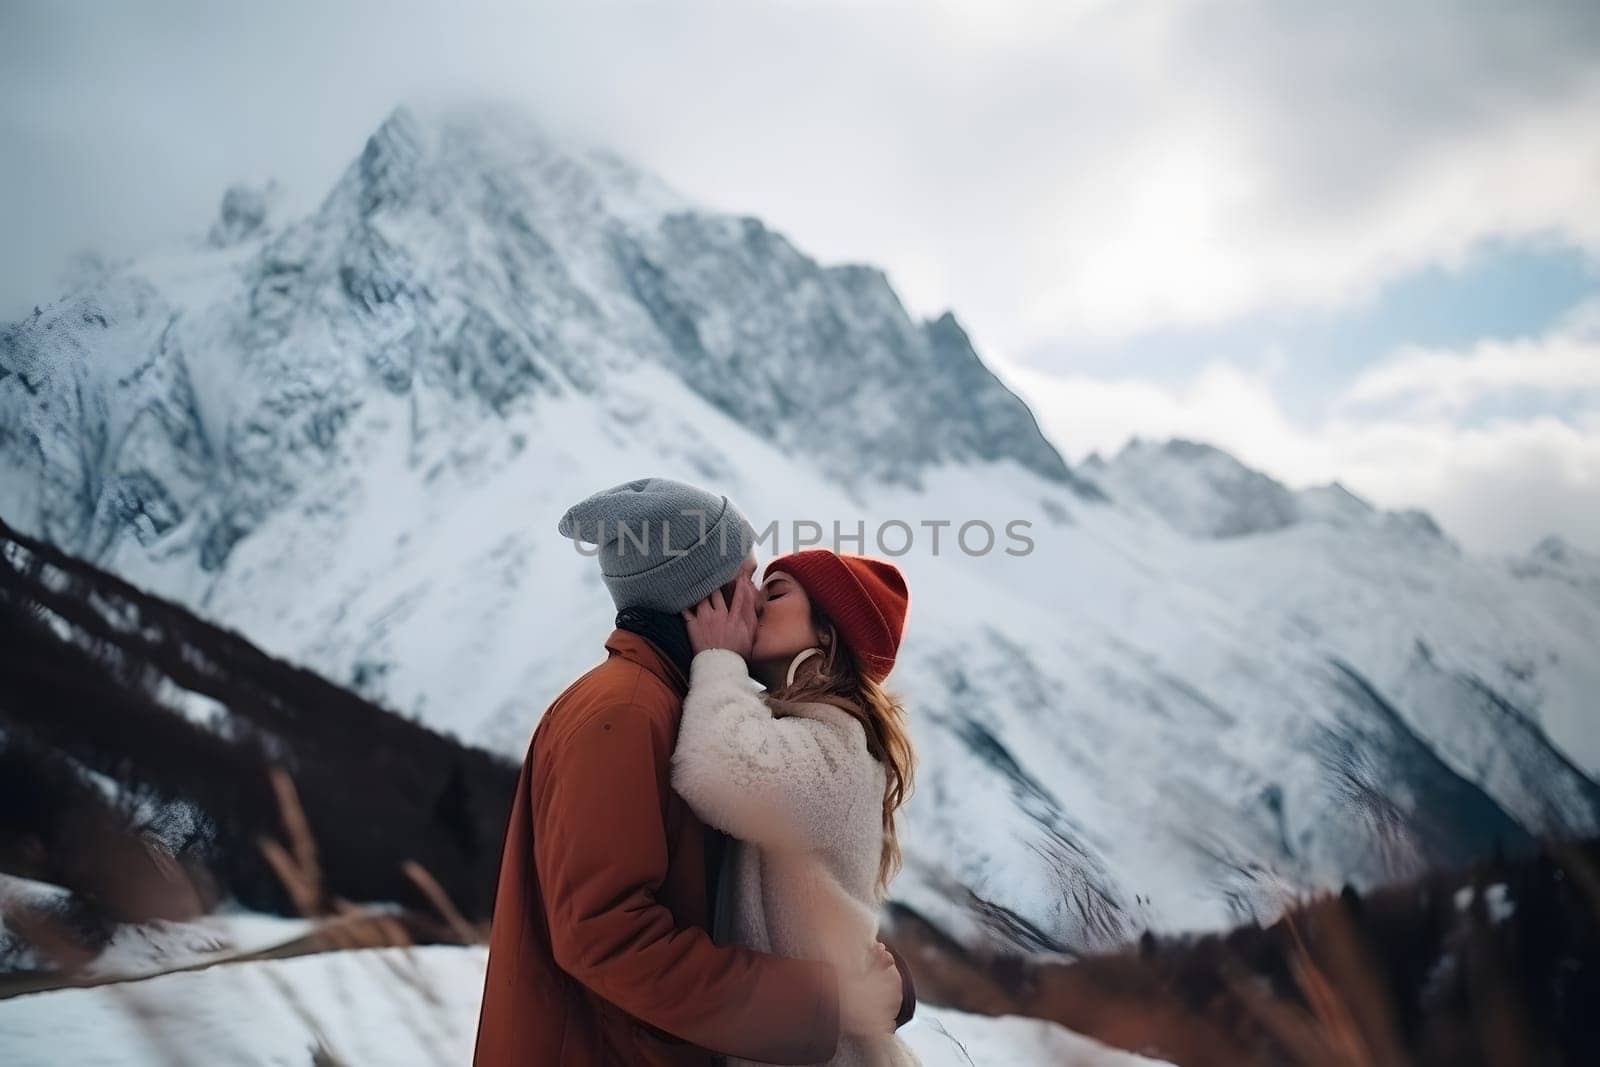 Loving couple kissing in mountains on background of snow covered peak at daylight, neural network generated image by z1b